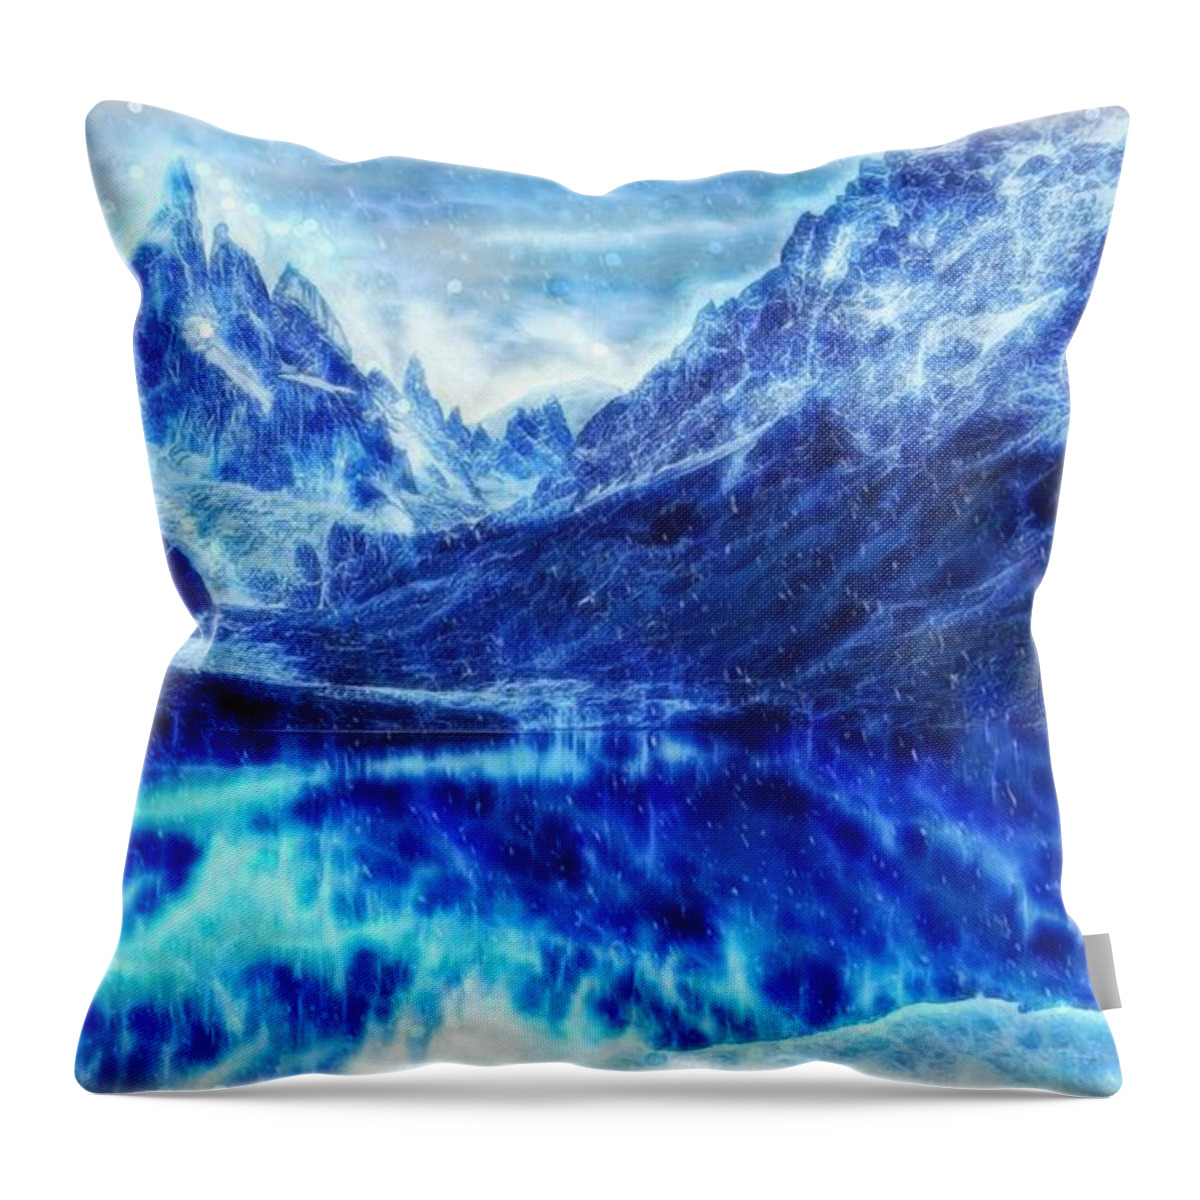 Winter Is Coming Throw Pillow featuring the digital art Winter is Coming - Game of Thrones landscape by Lilia D